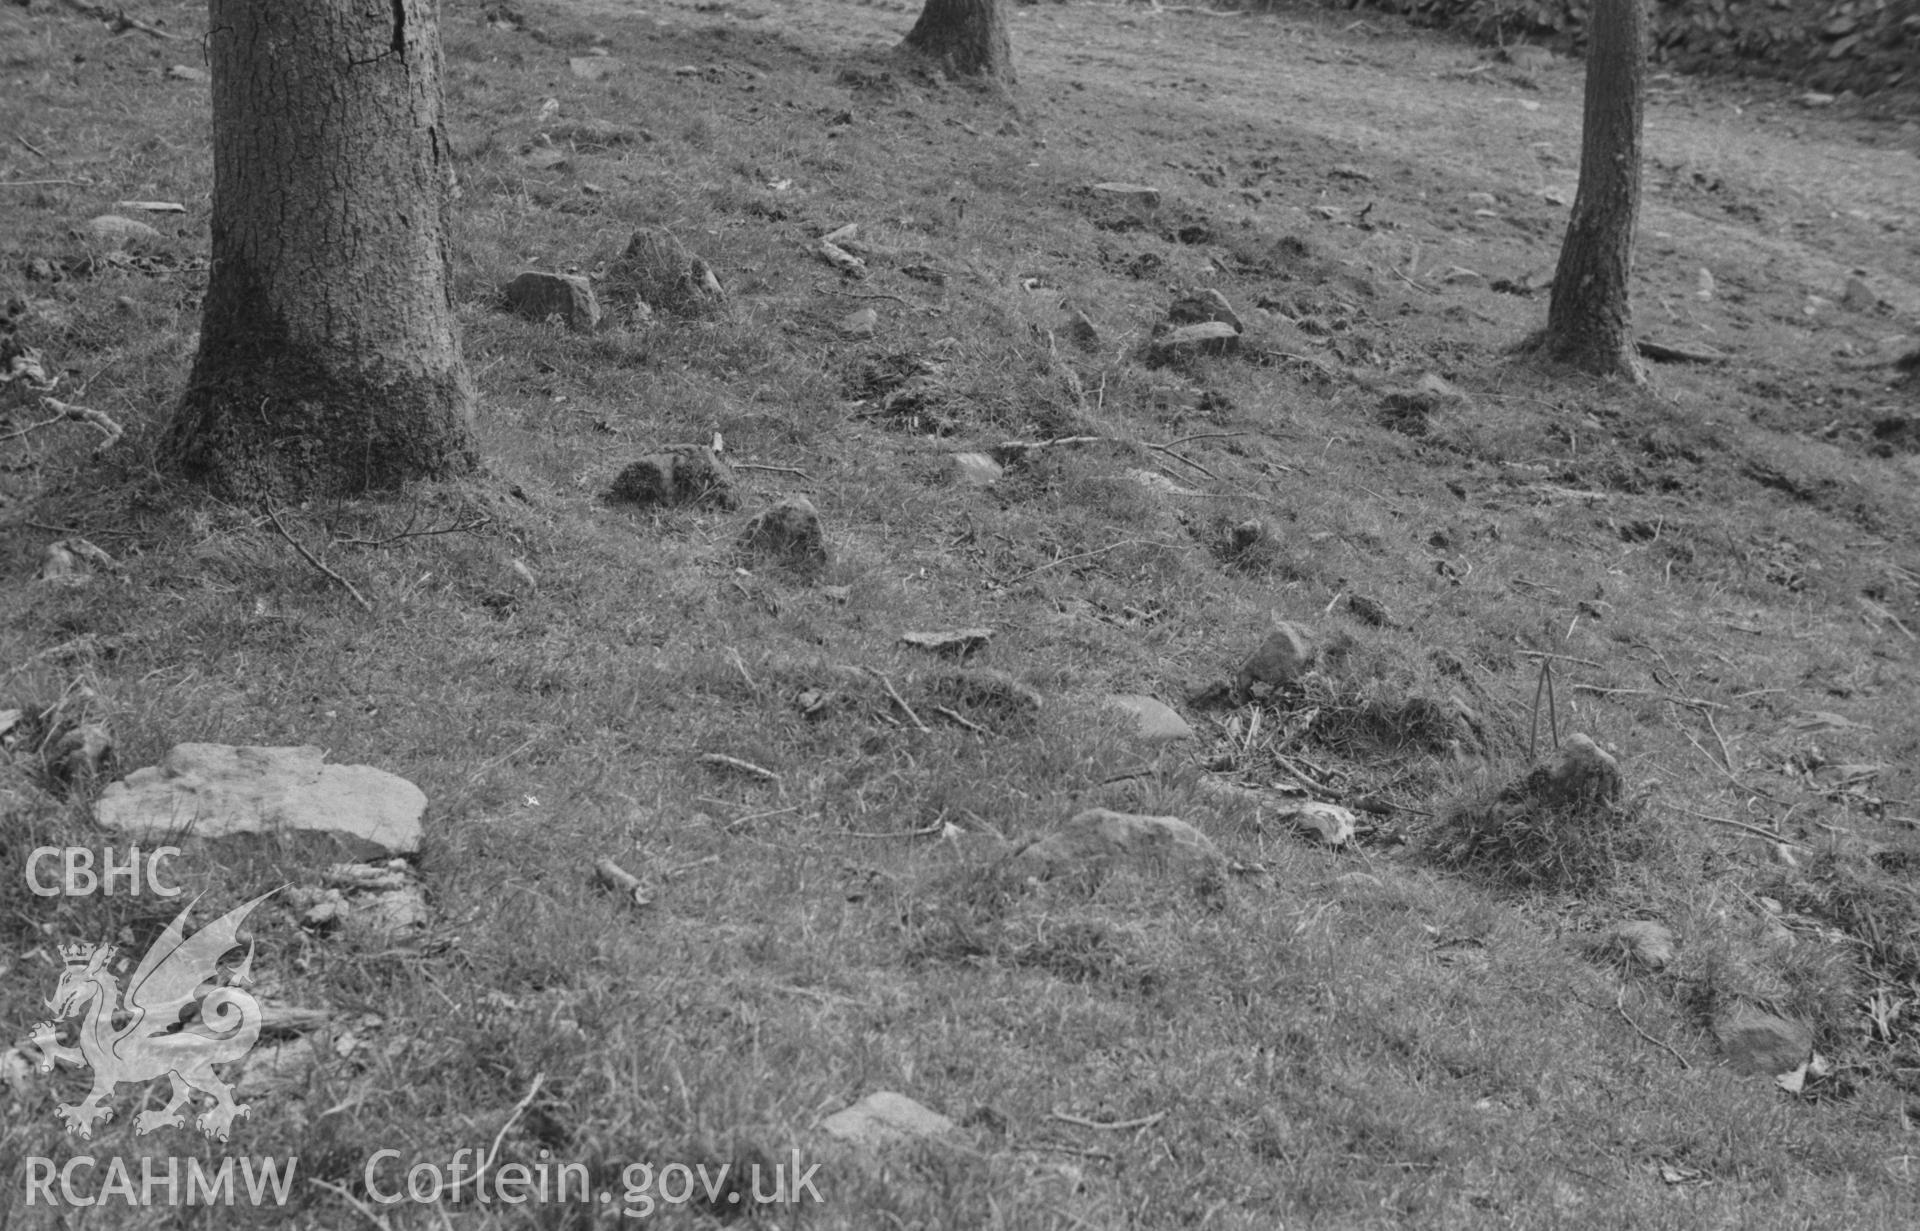 Digital copy of a black and white negative showing ground view at Craig Gwytheyrn hillfort. Photographed by Arthur O. Chater in April 1967.